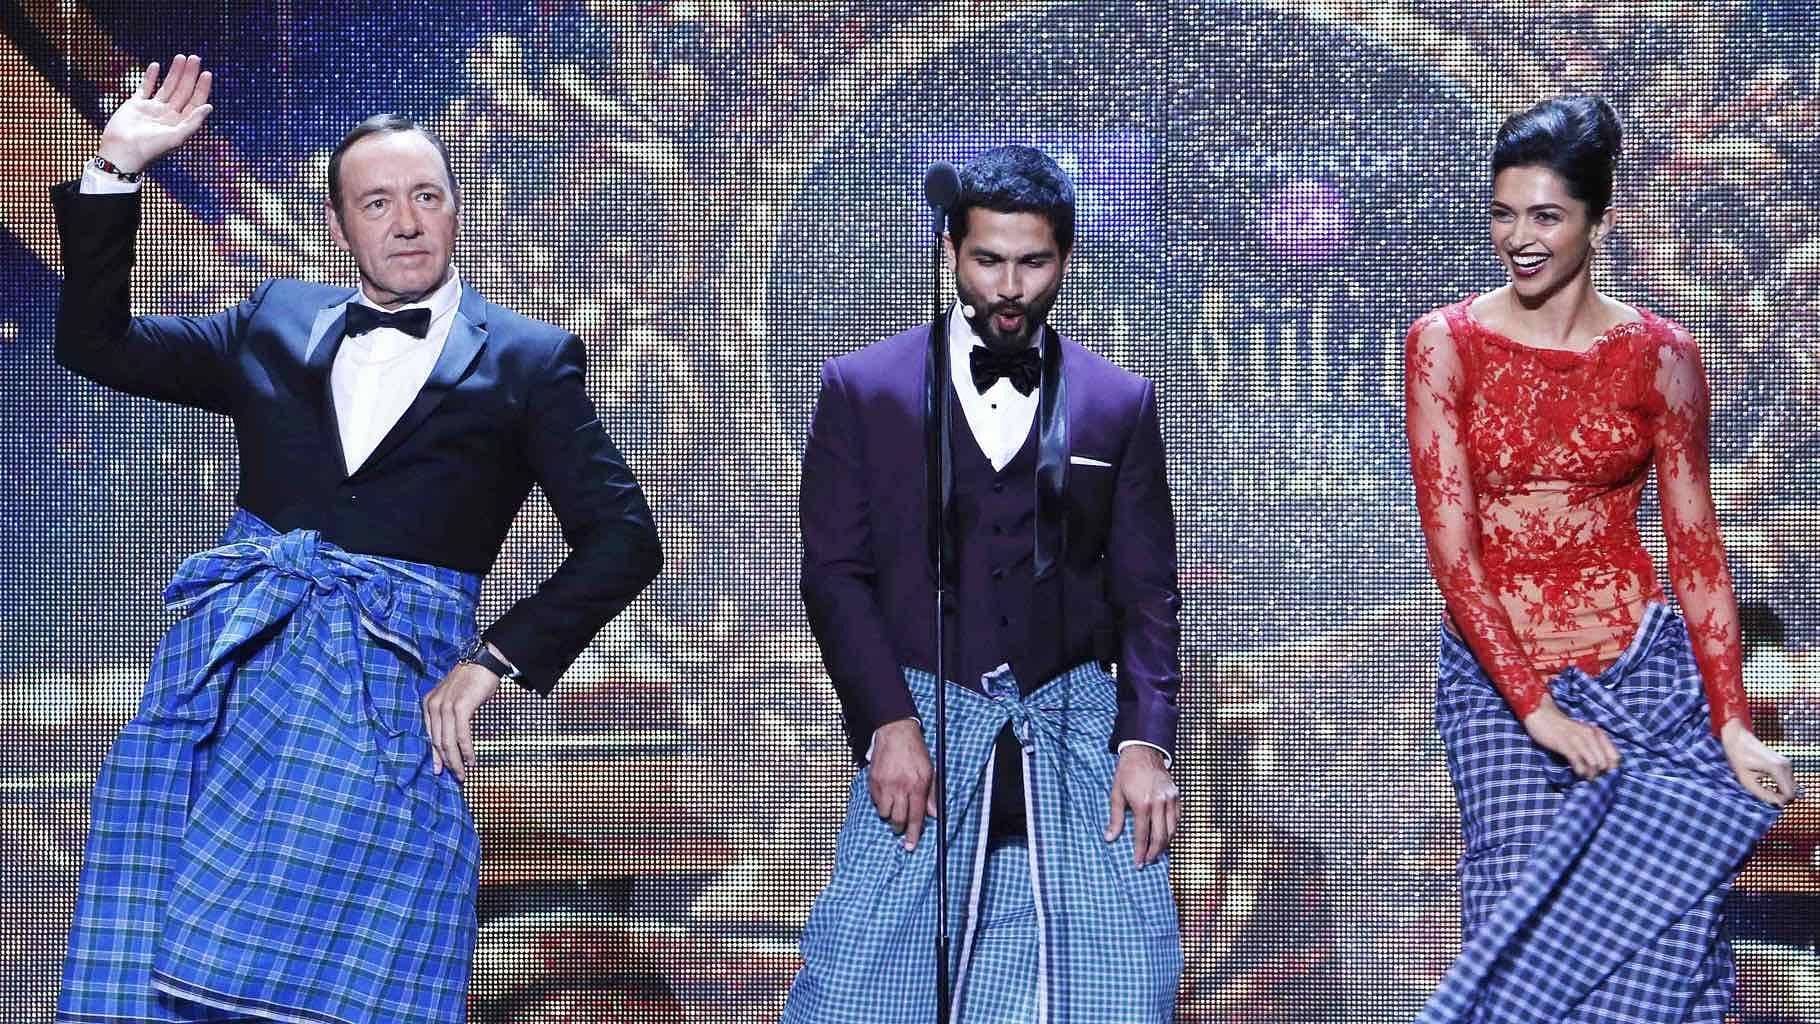 Kevin Spacey does the <i>lungi</i> dance with Shahid Kapoor and Deepika Padukone at IIFA 2014 in Florida (Photo: Reuters)<a href="http://www.thequint.com/section/Entertainment"></a>